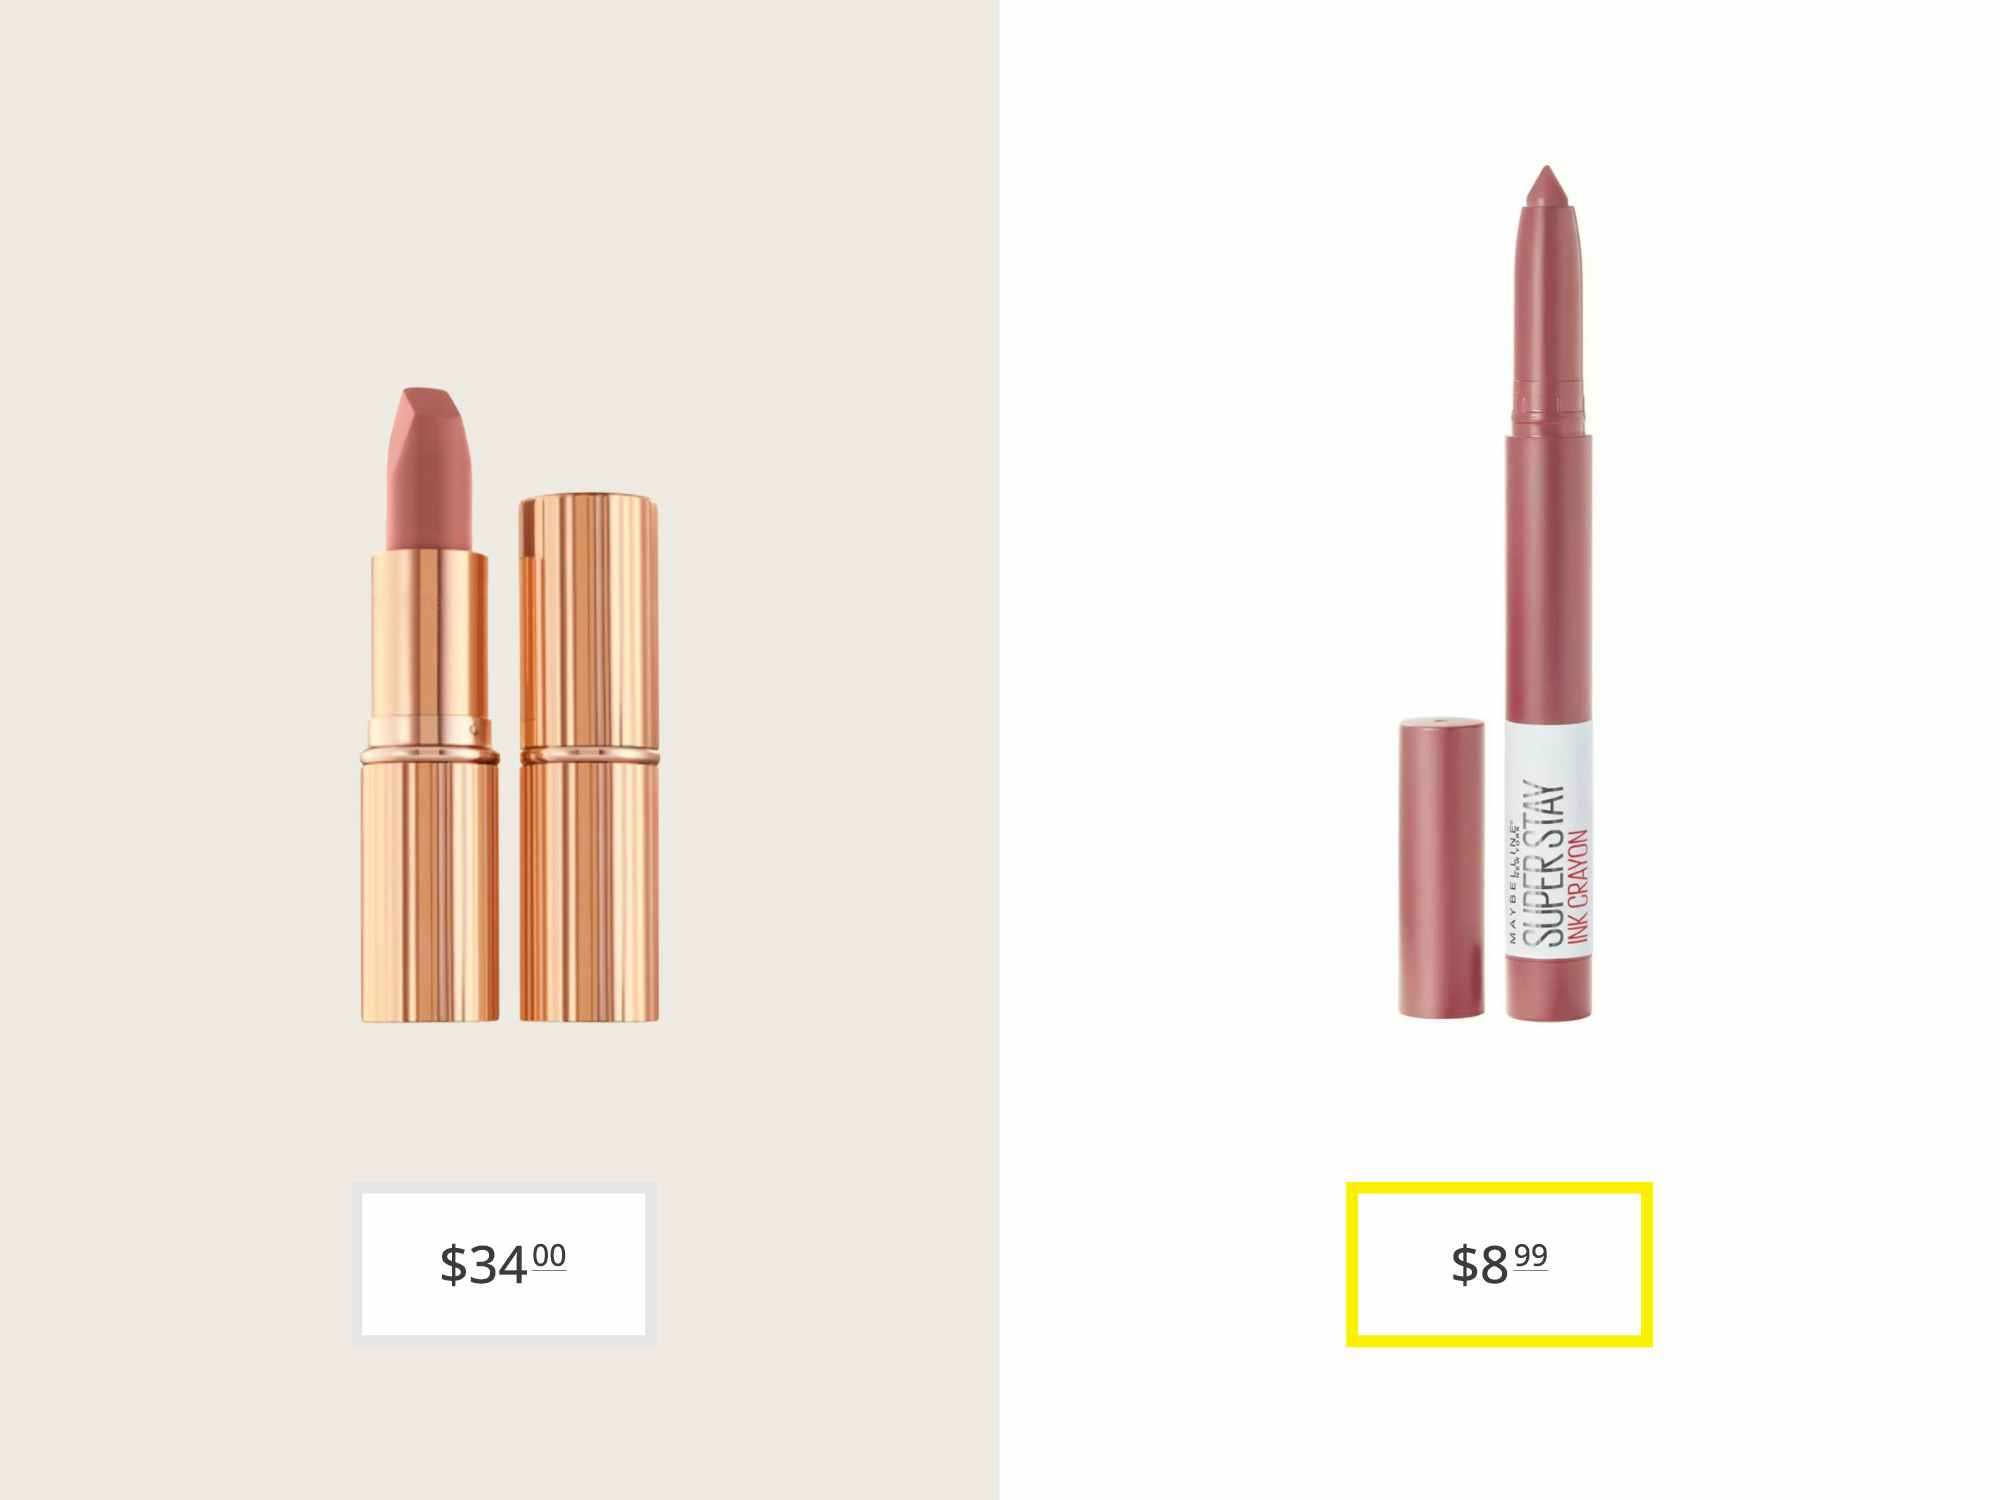 charlotte tilbury pillow talk and maybelline super stay ink crayon lipstick price comparison graphic